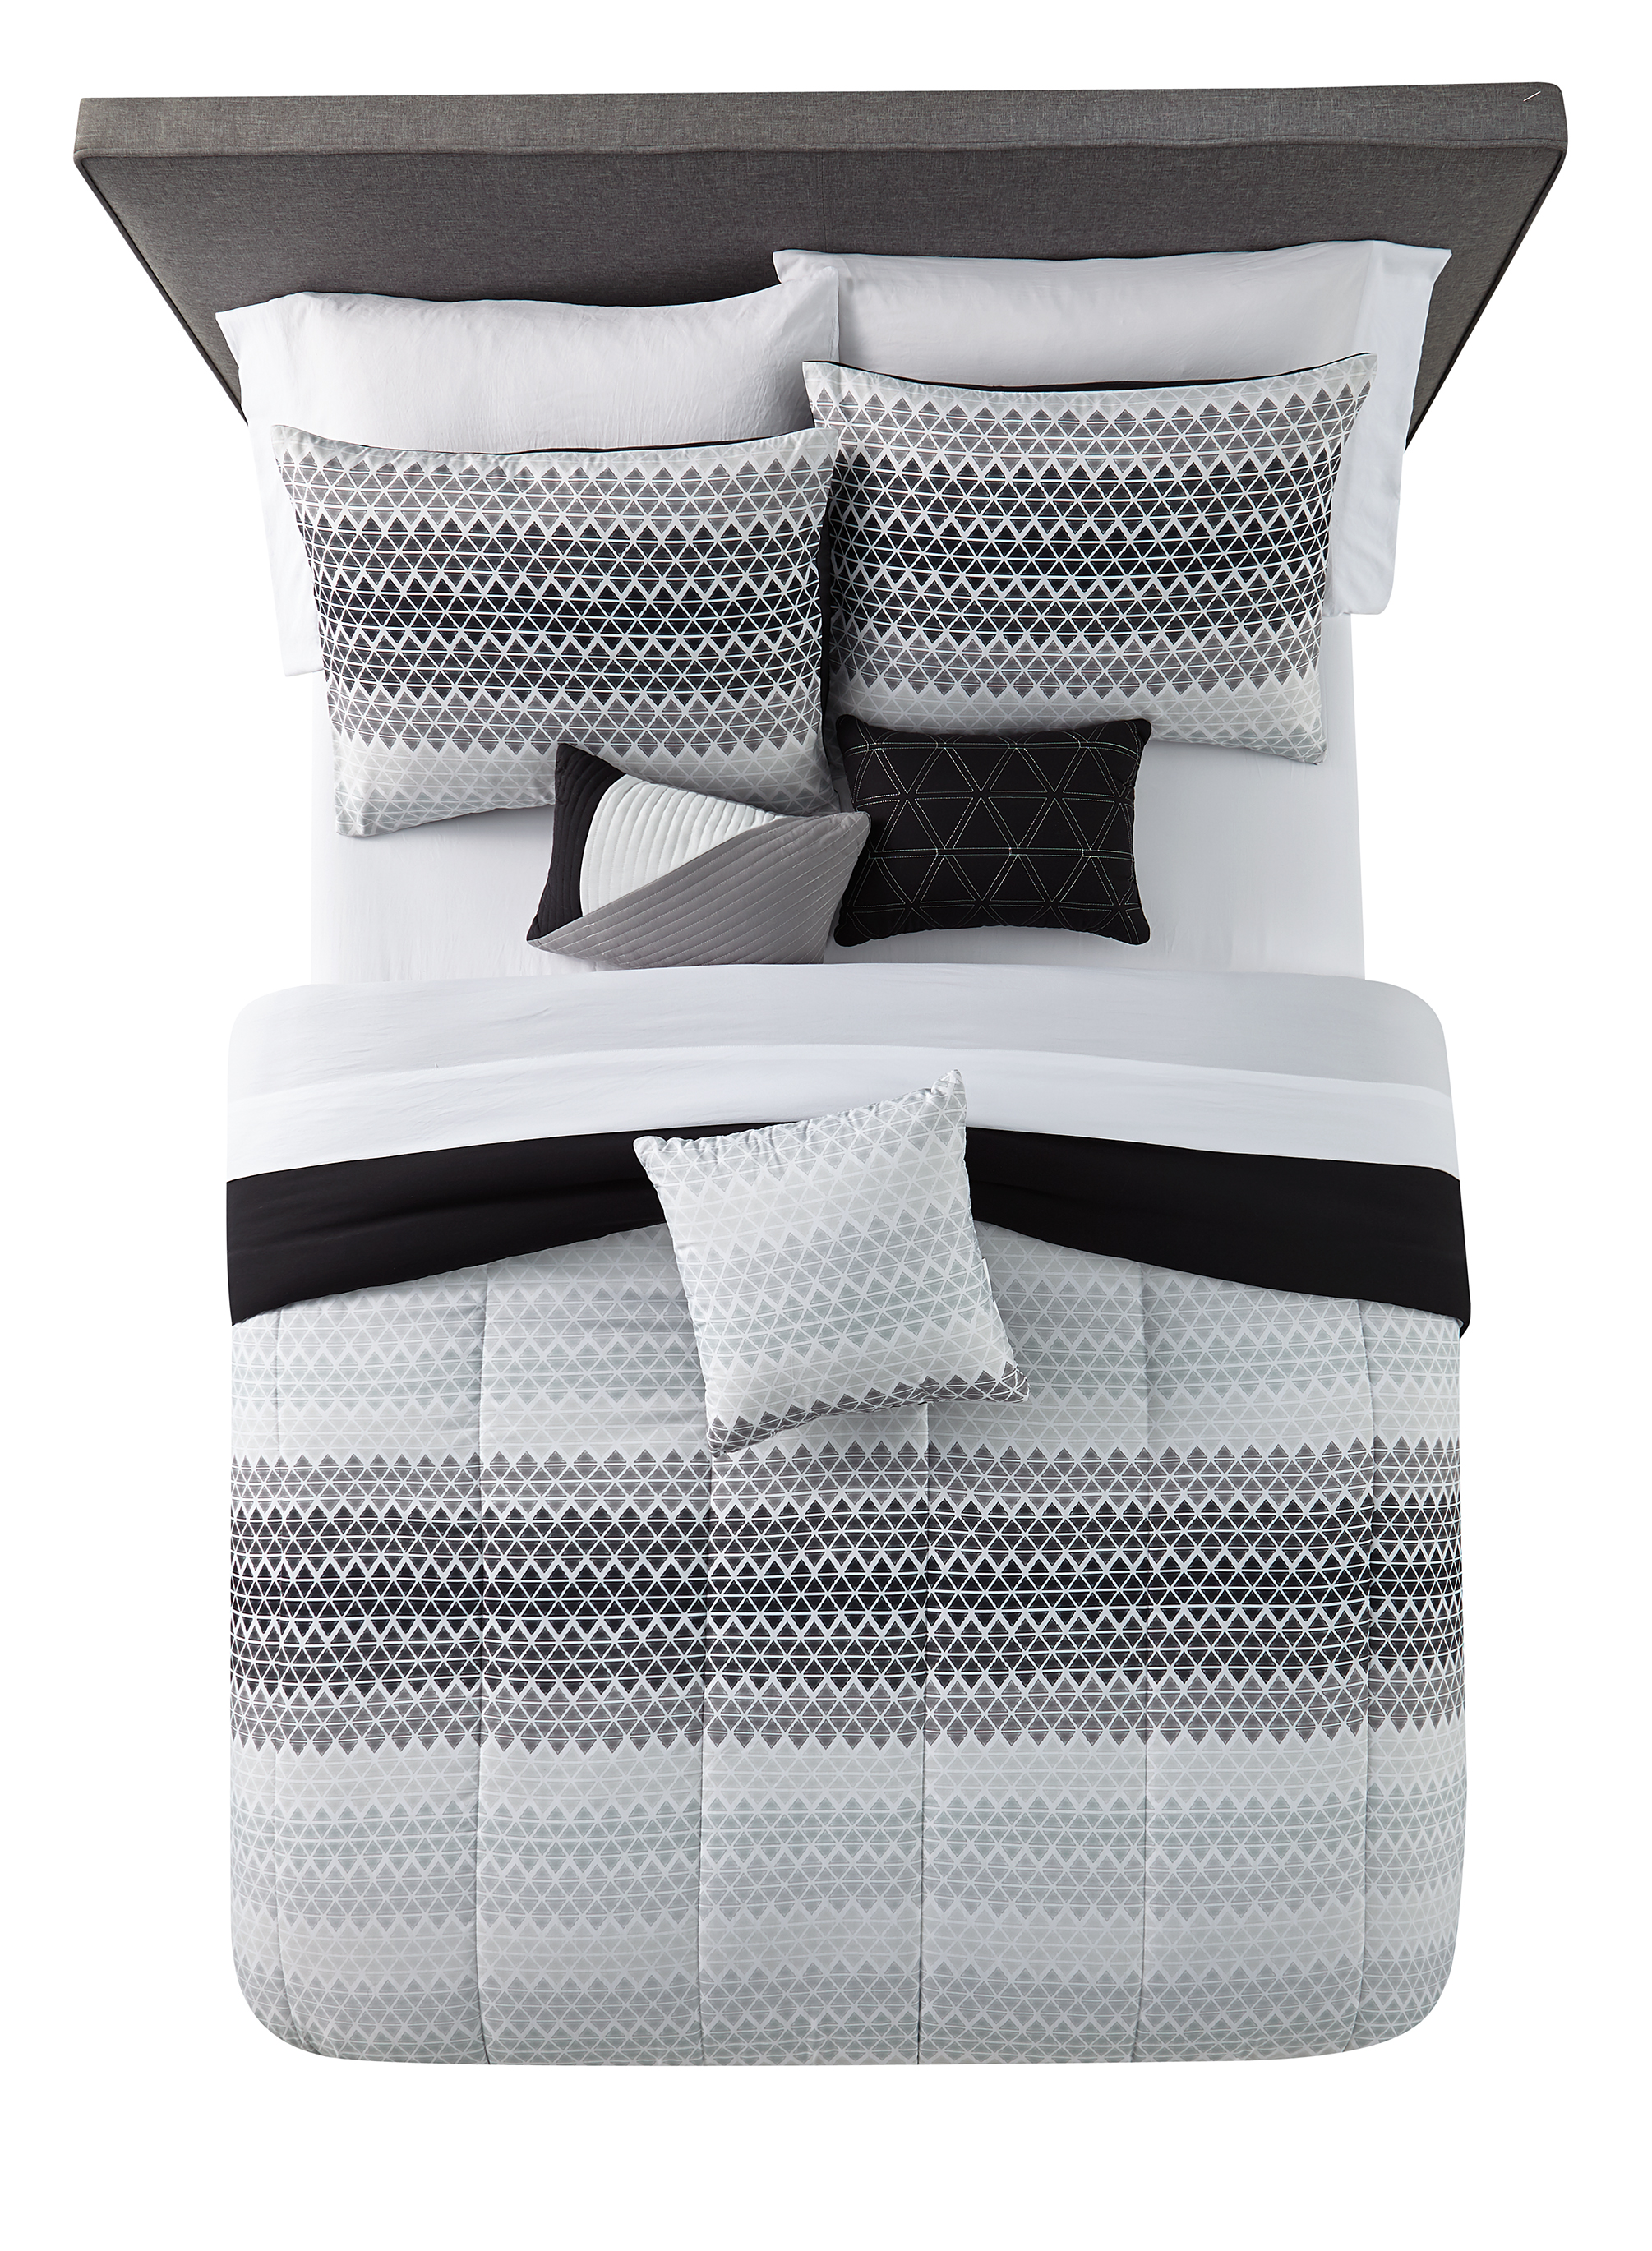 Mainstays Black and White Geometric 8 Piece Bed in a Bag Comforter Set With Sheets, Twin/Twin XL - image 4 of 7